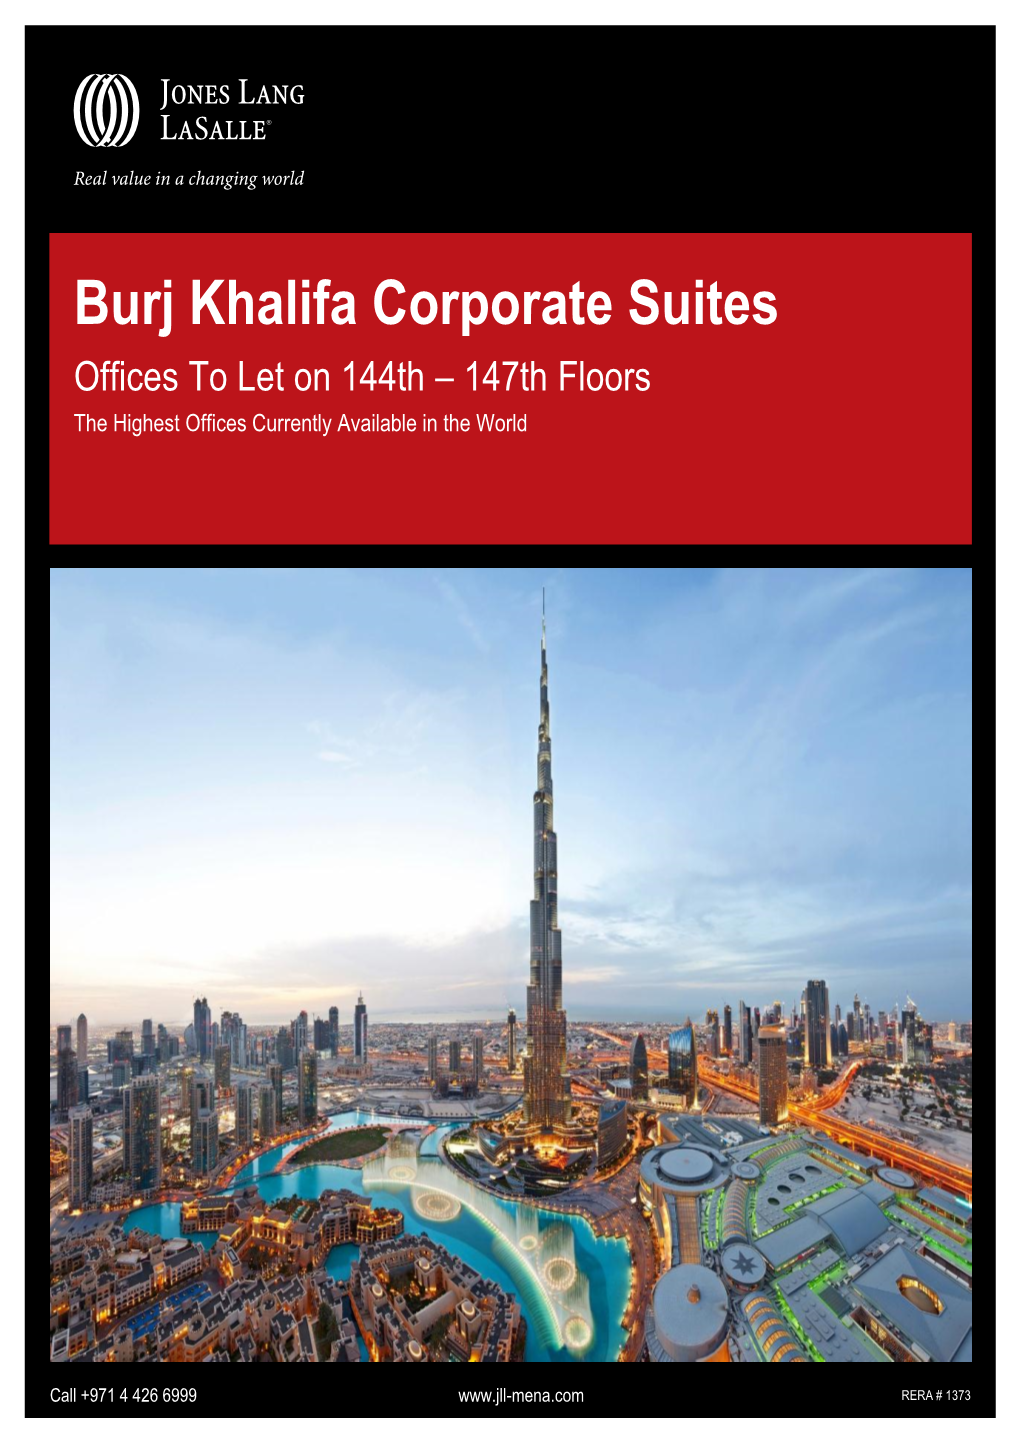 Burj Khalifa Corporate Suites Offices to Let on 144Th – 147Th Floors the Highest Offices Currently Available in the World